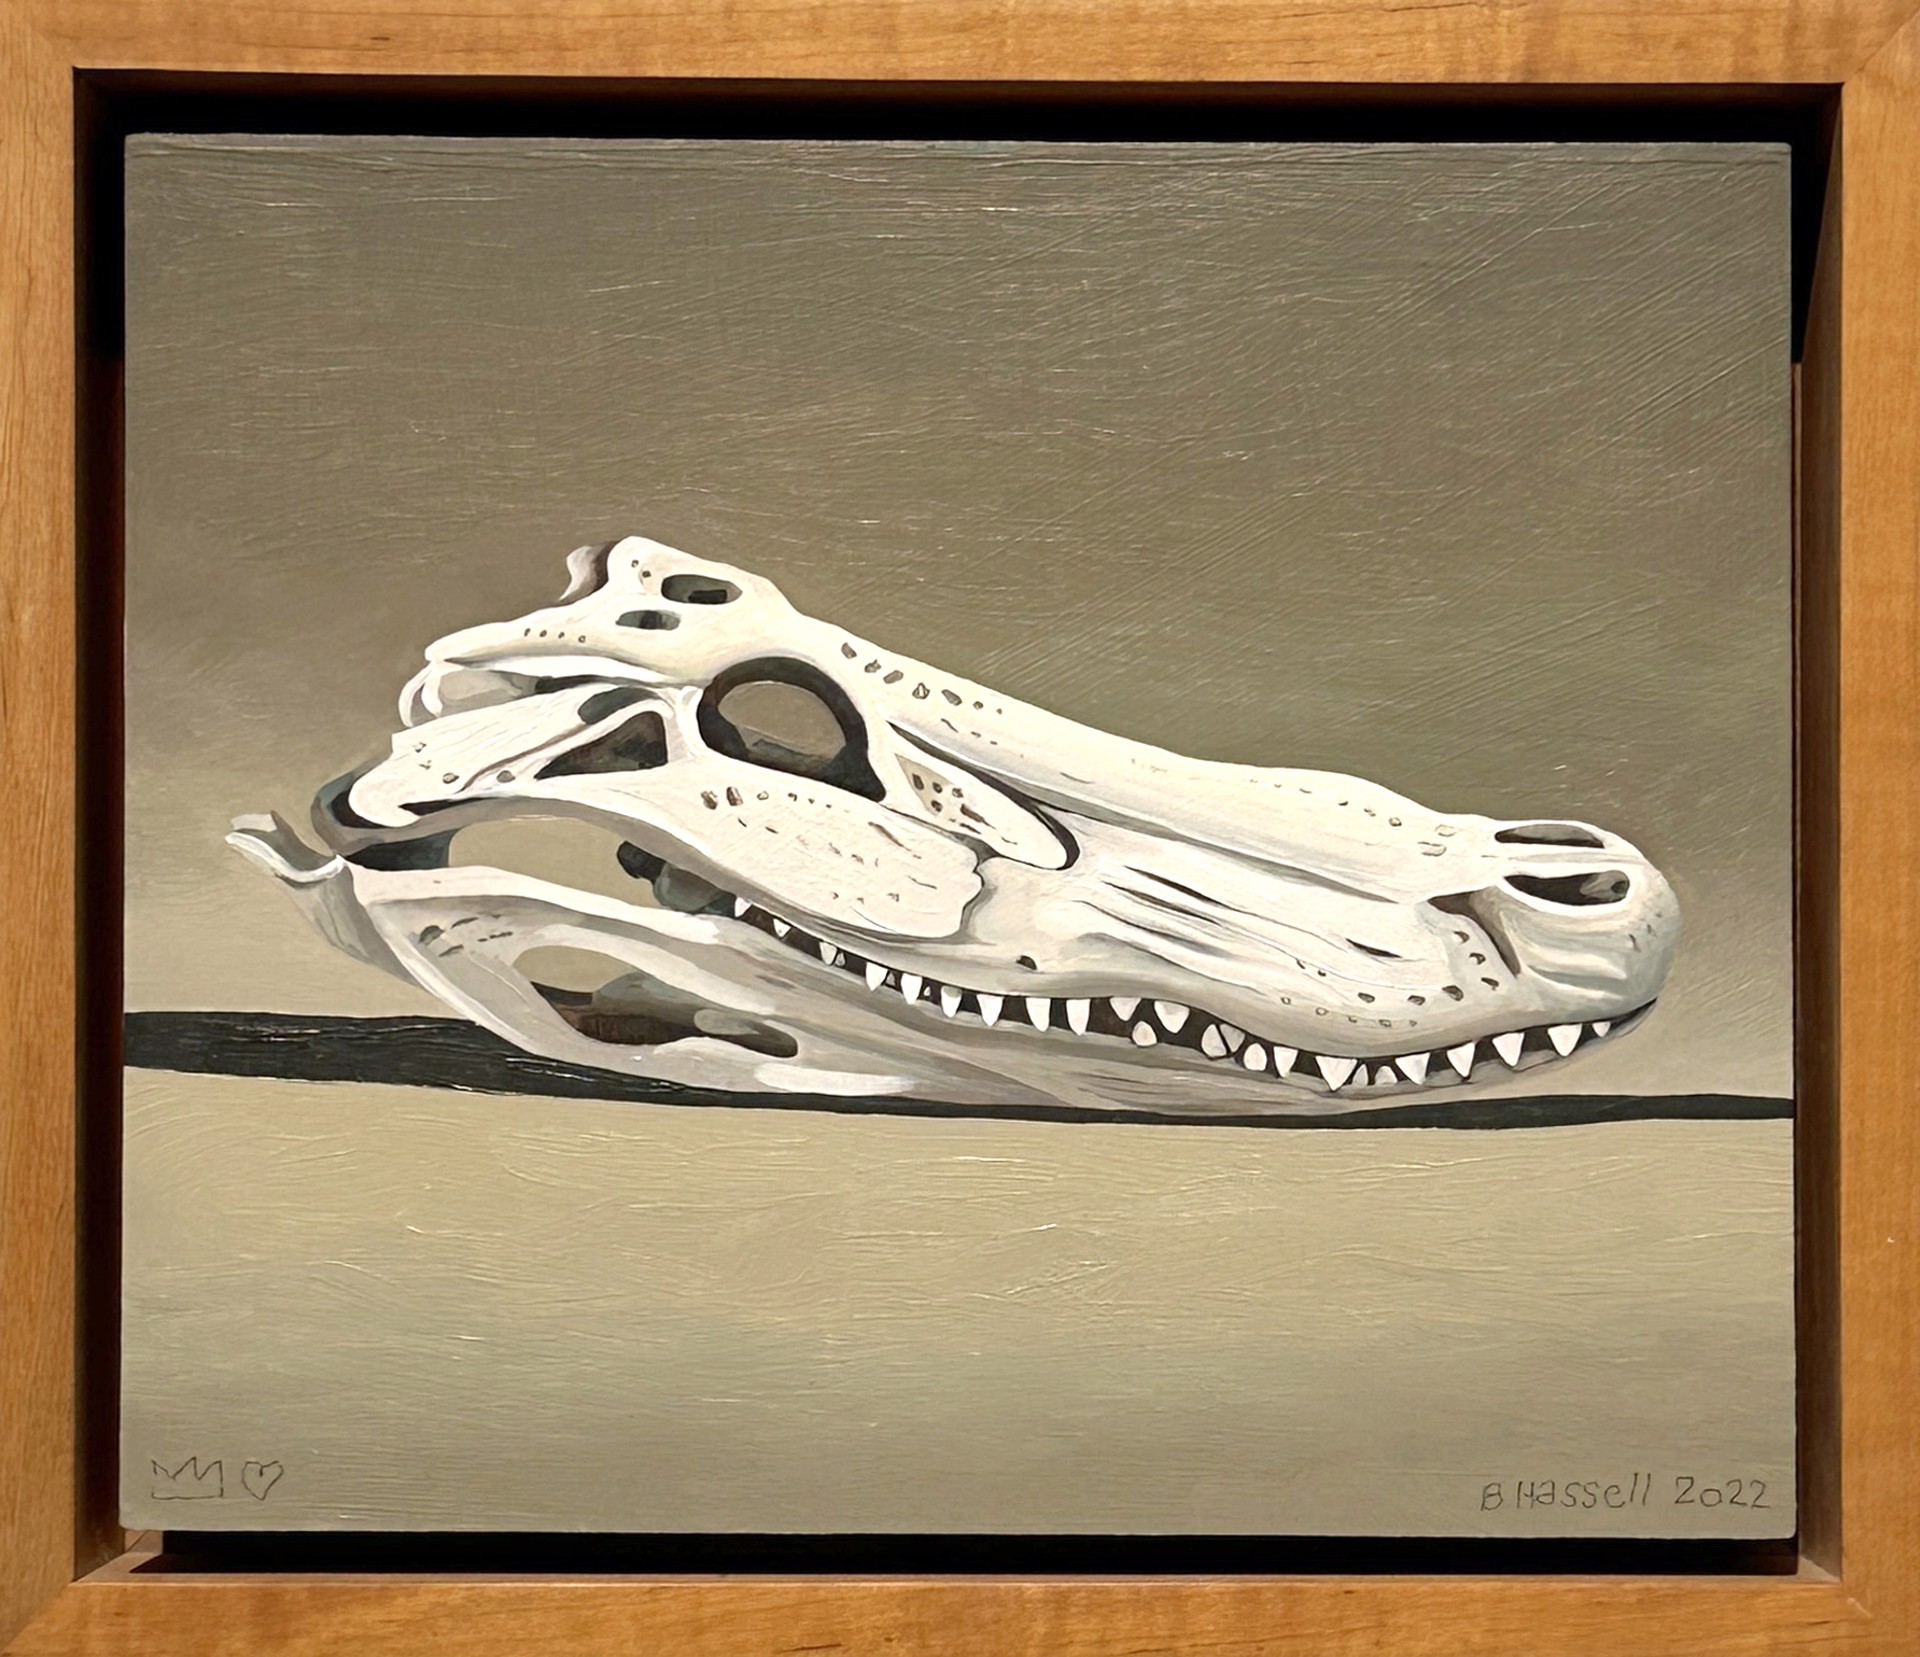 Alligator Skull by Billy Hassell